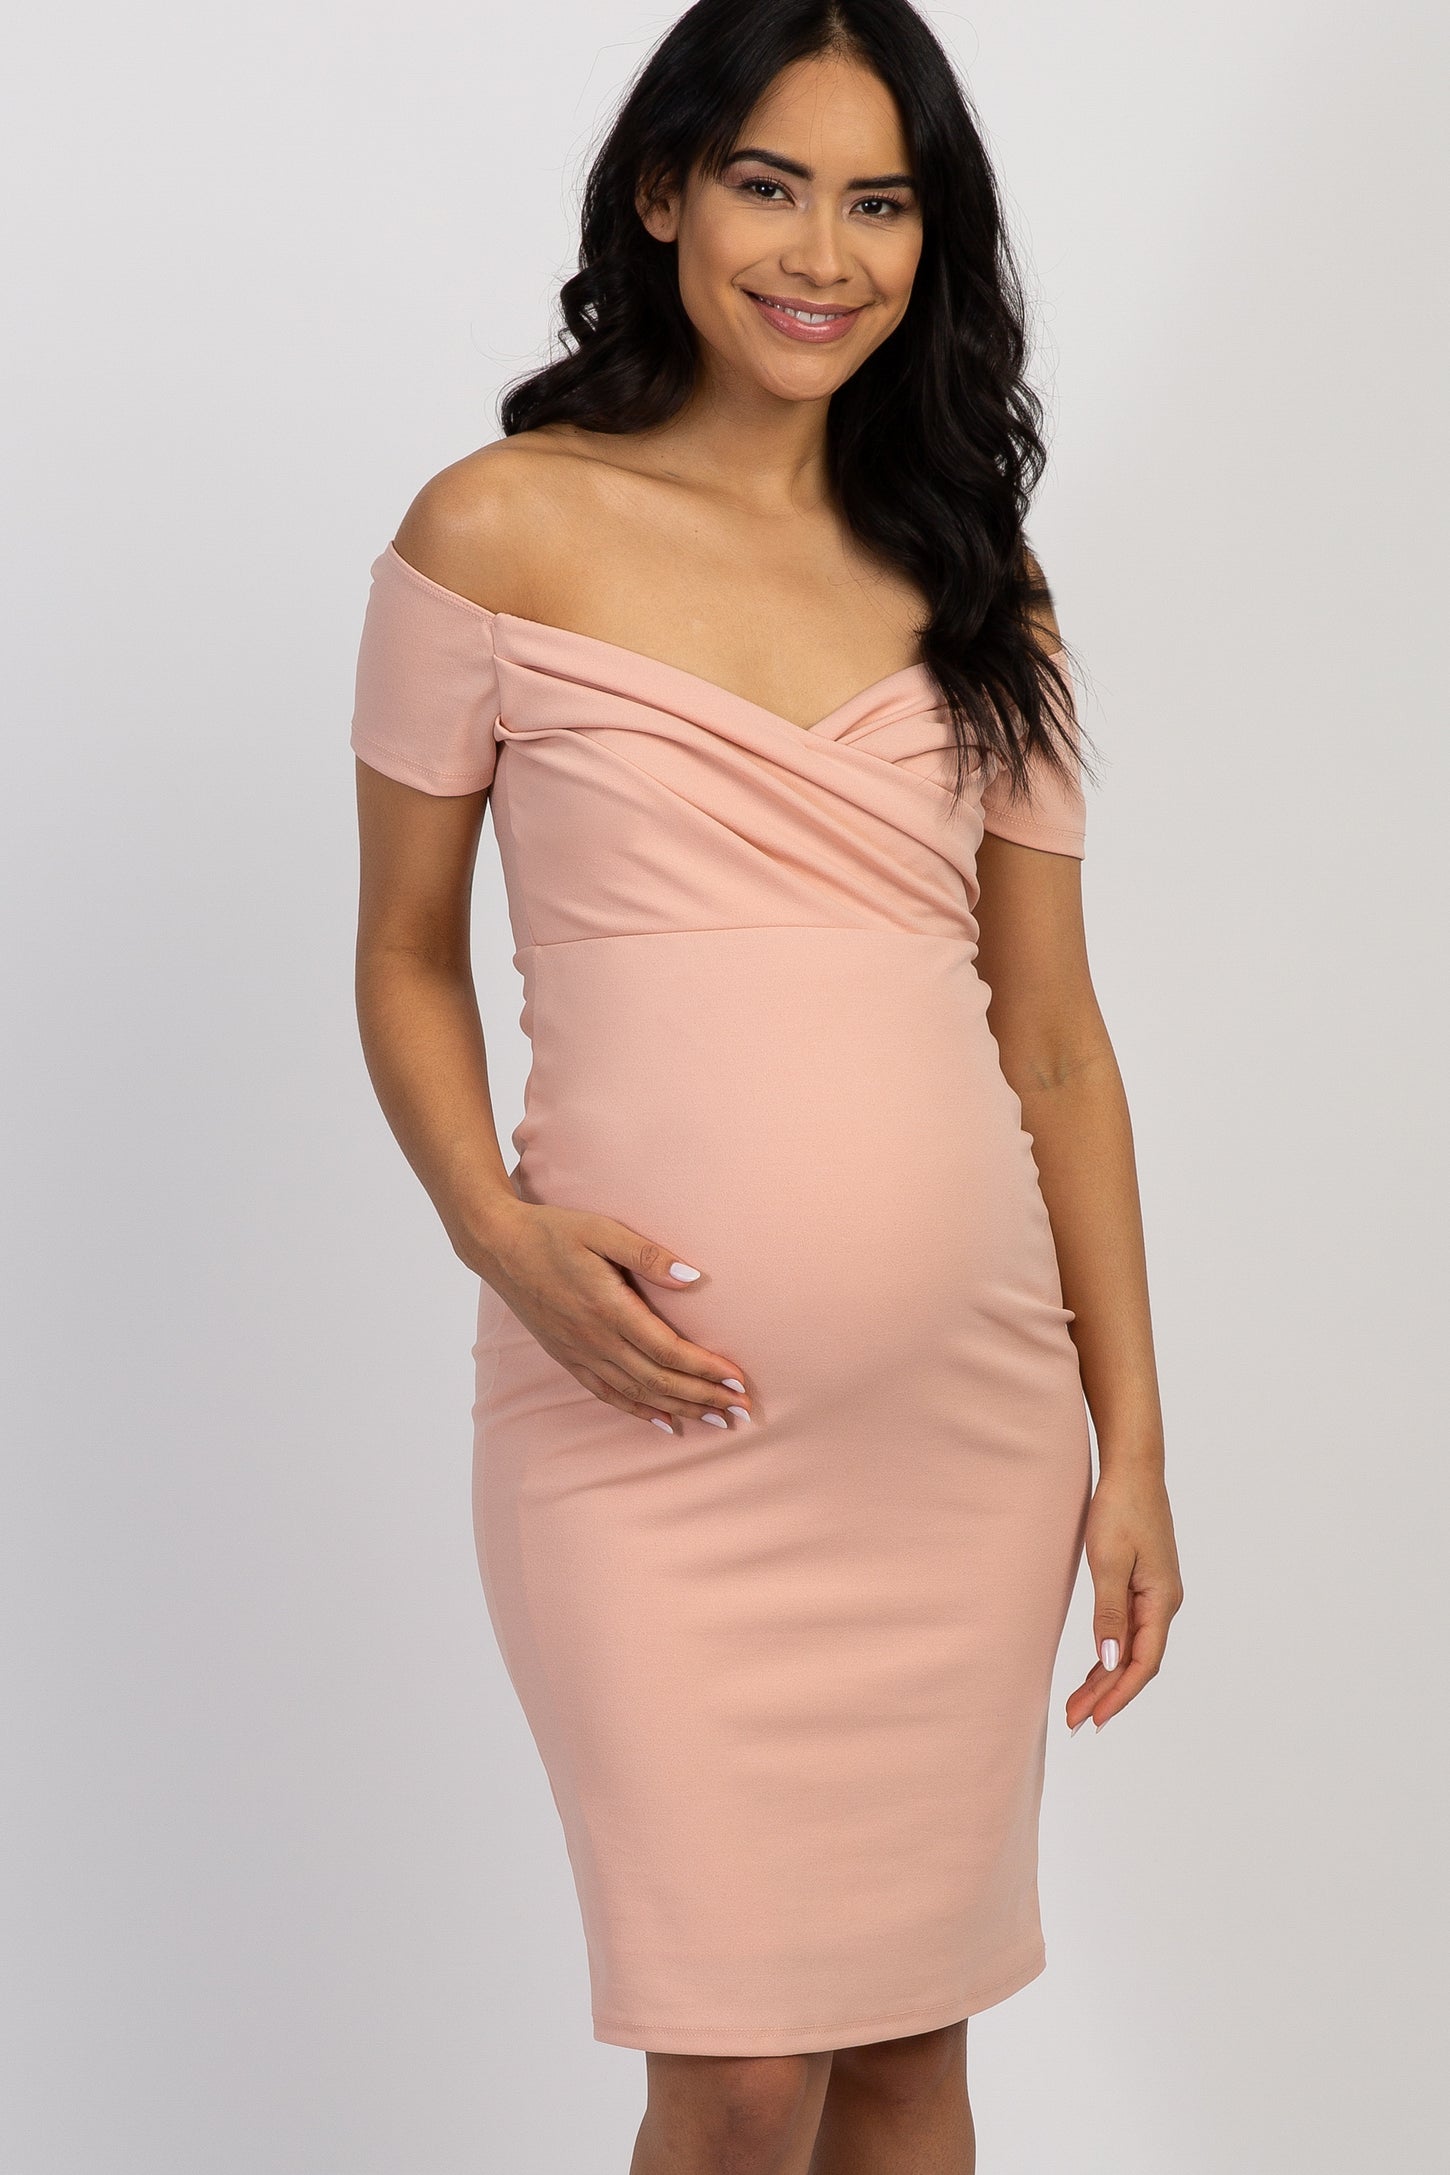 PinkBlush Light Pink Solid Off Shoulder Maternity Fitted Dress